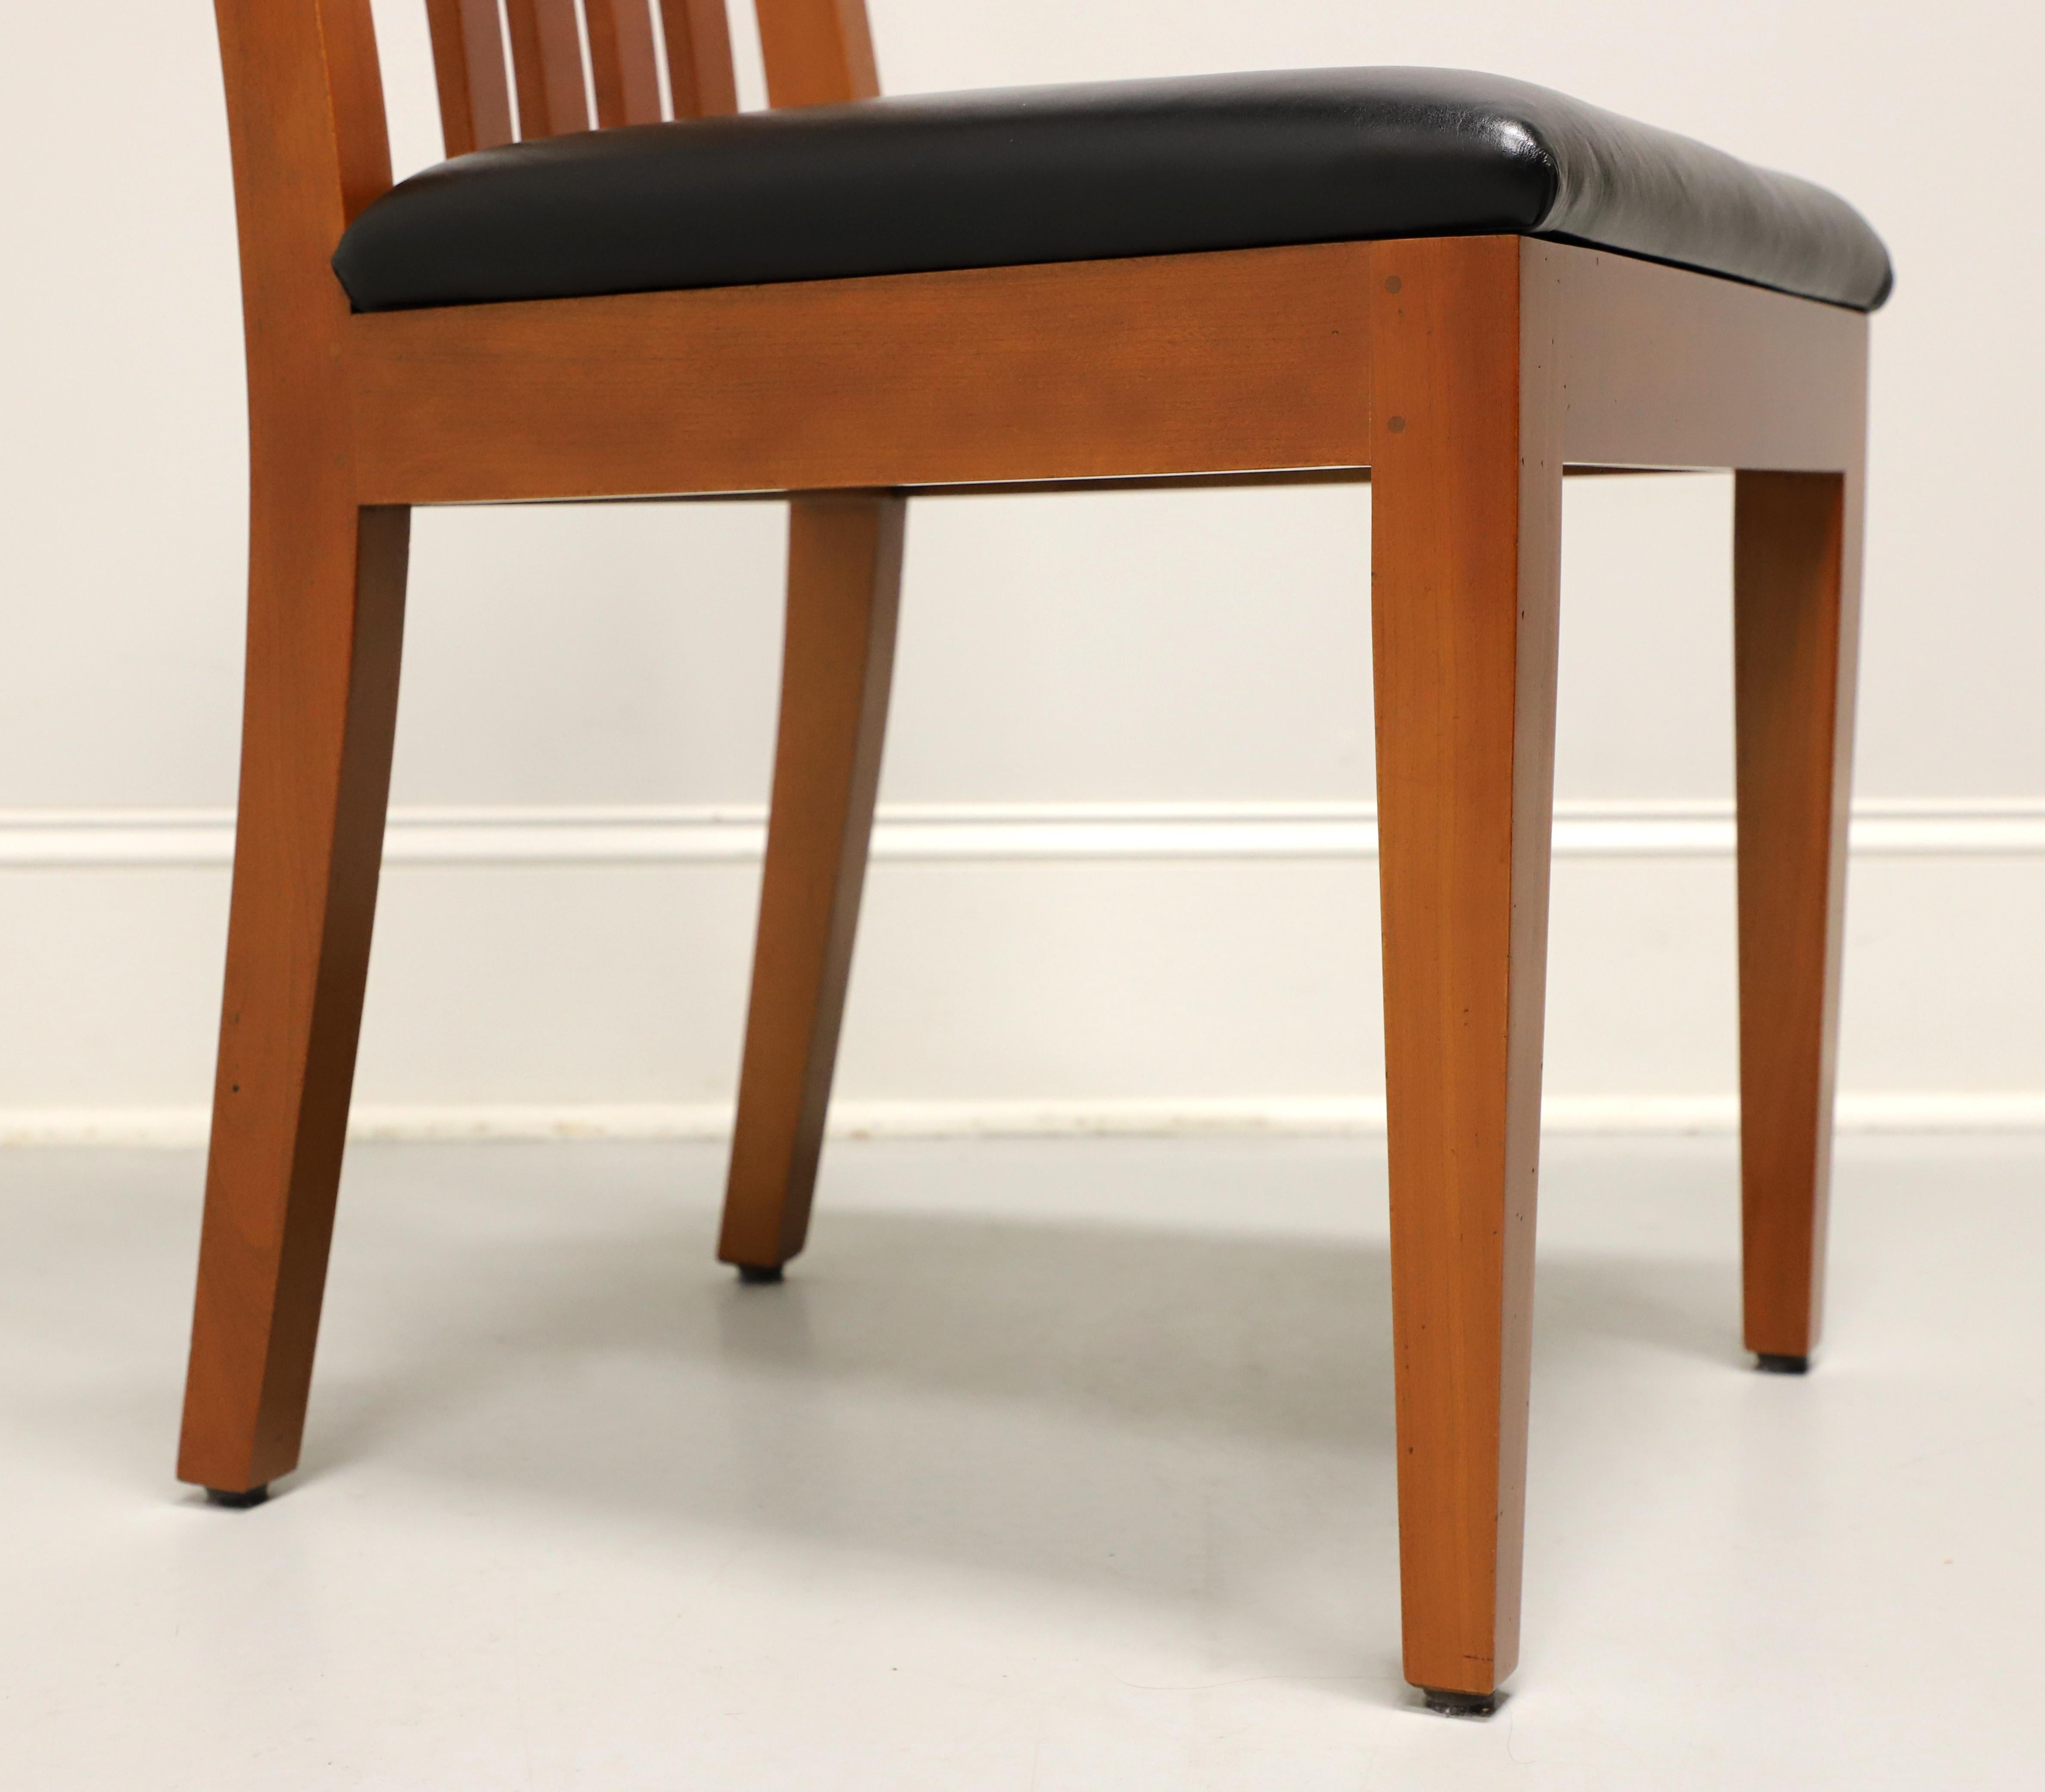 ROBERT BERGELIN Custom Solid Cherry Mission Dining Side Chairs - Pair C For Sale 2